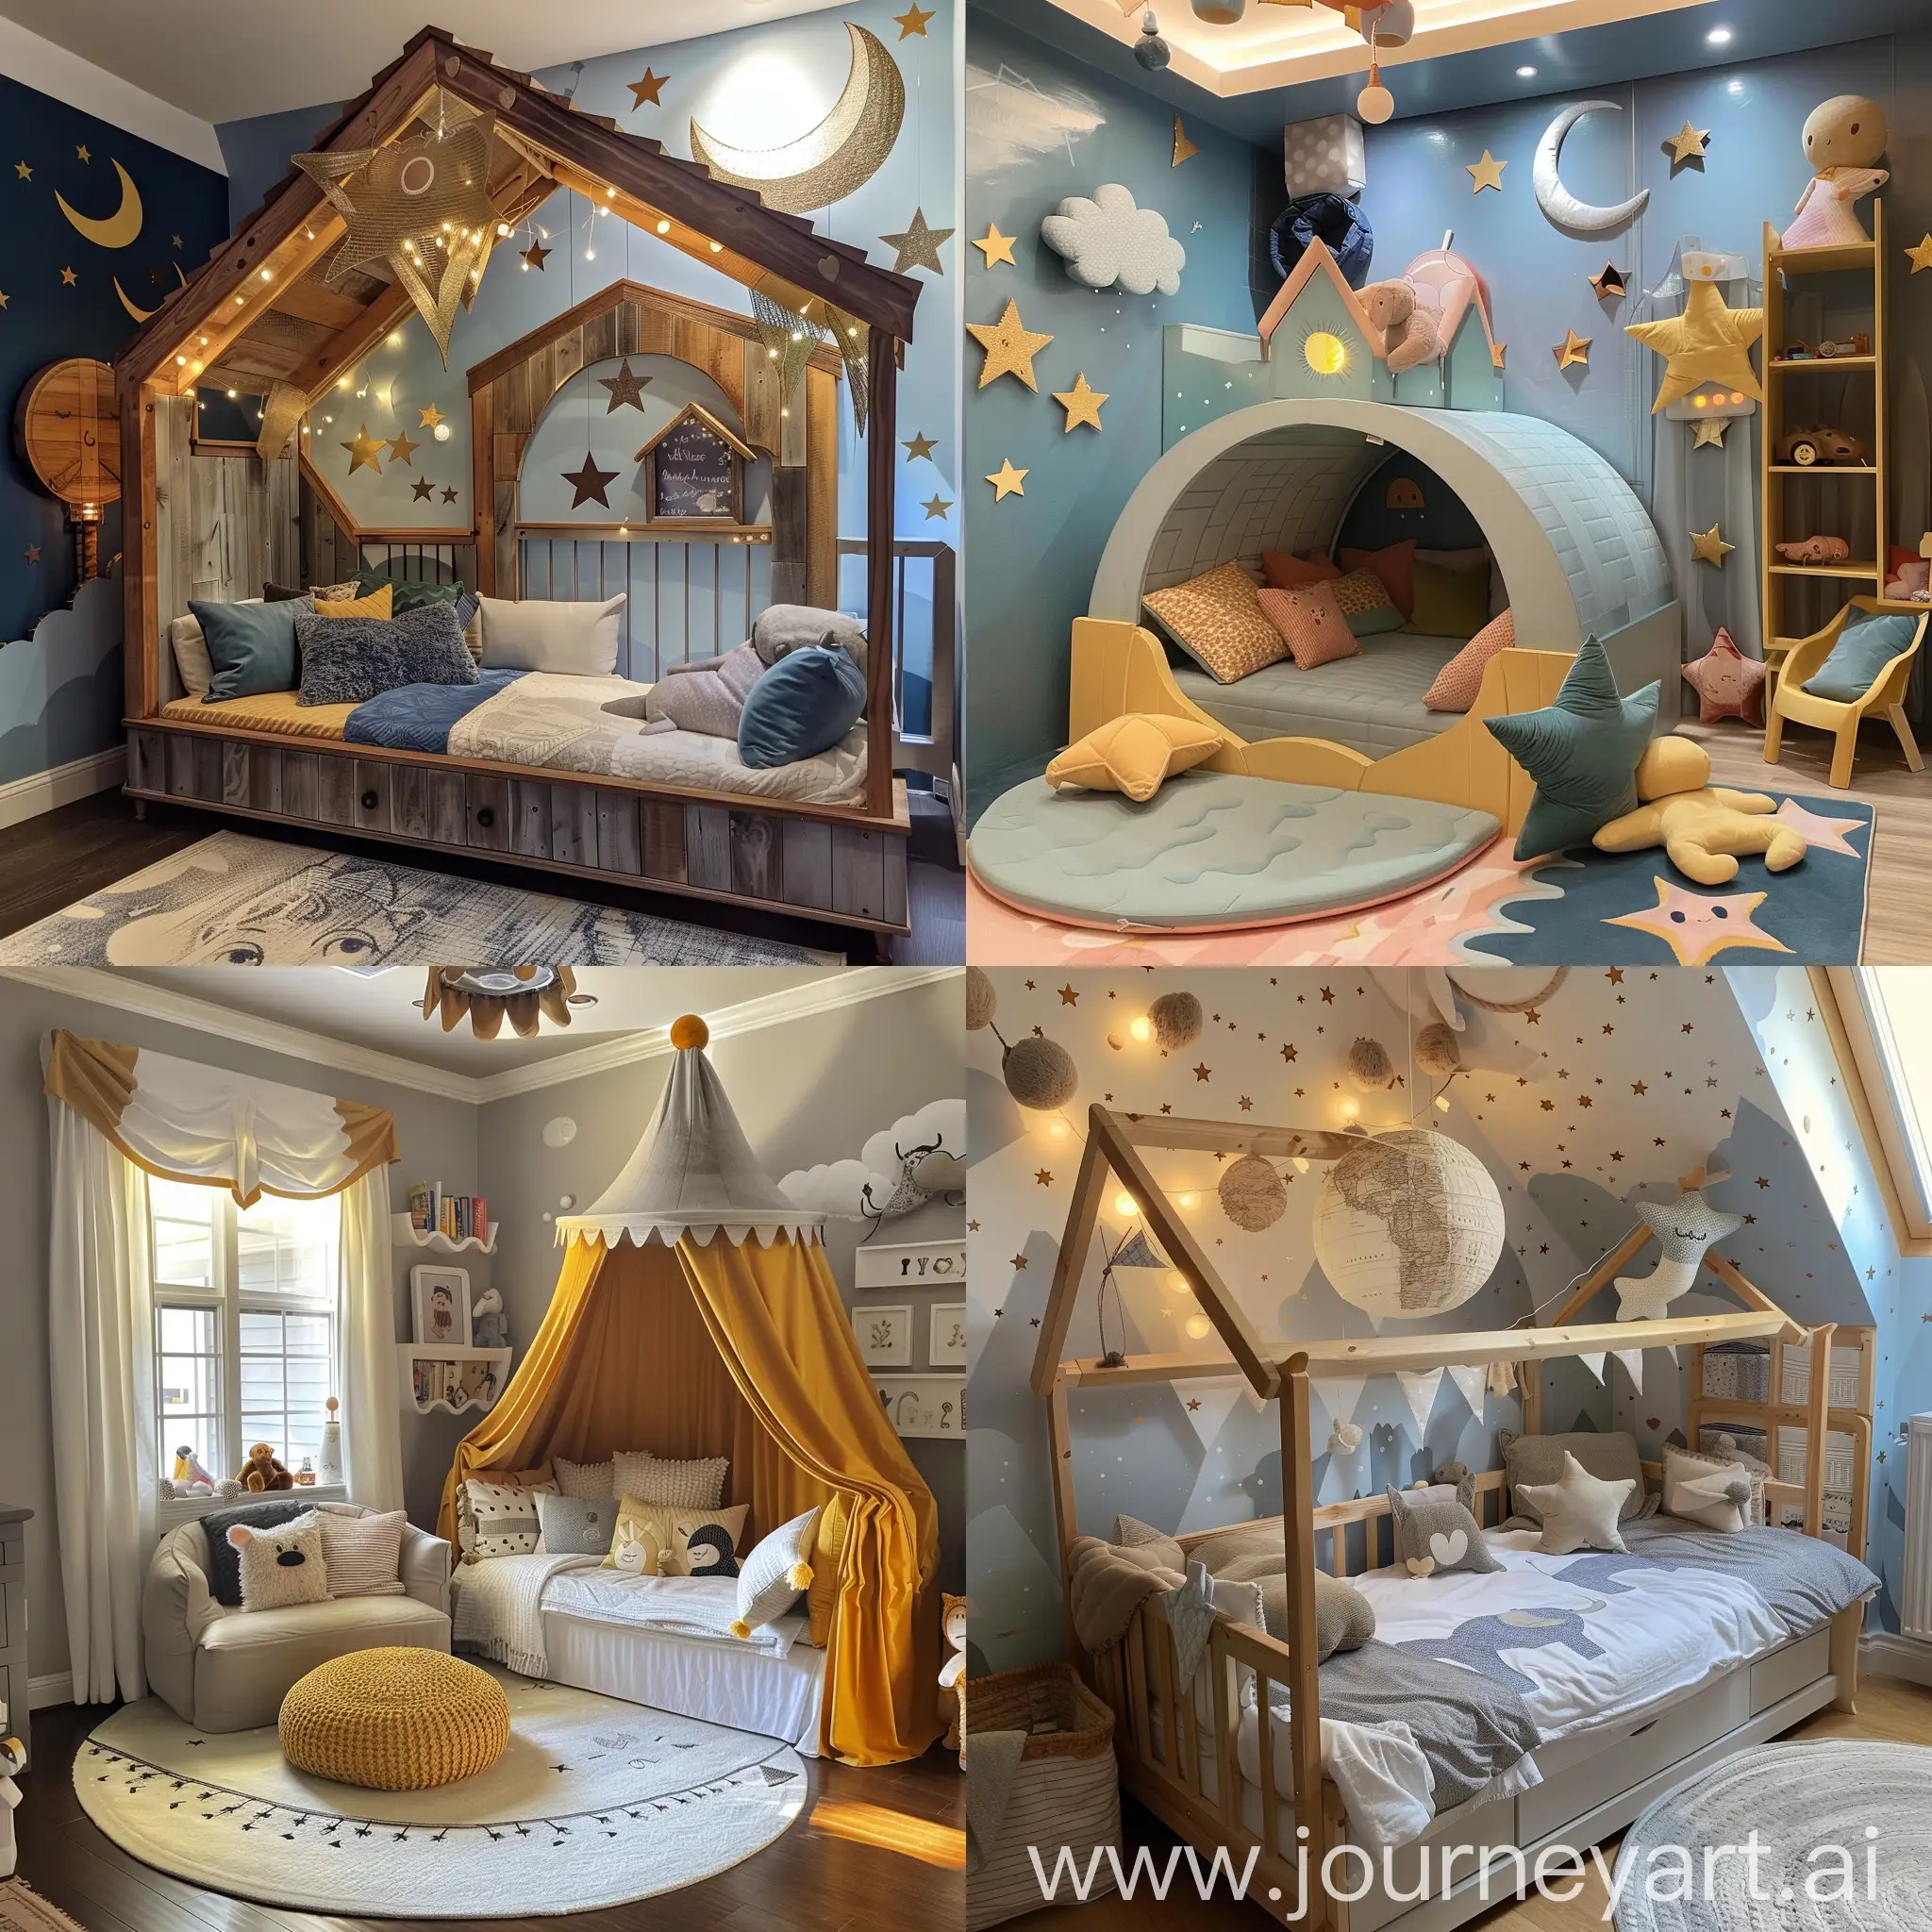 Childs-Bedroom-Design-with-Vibrant-Colors-and-Playful-Atmosphere